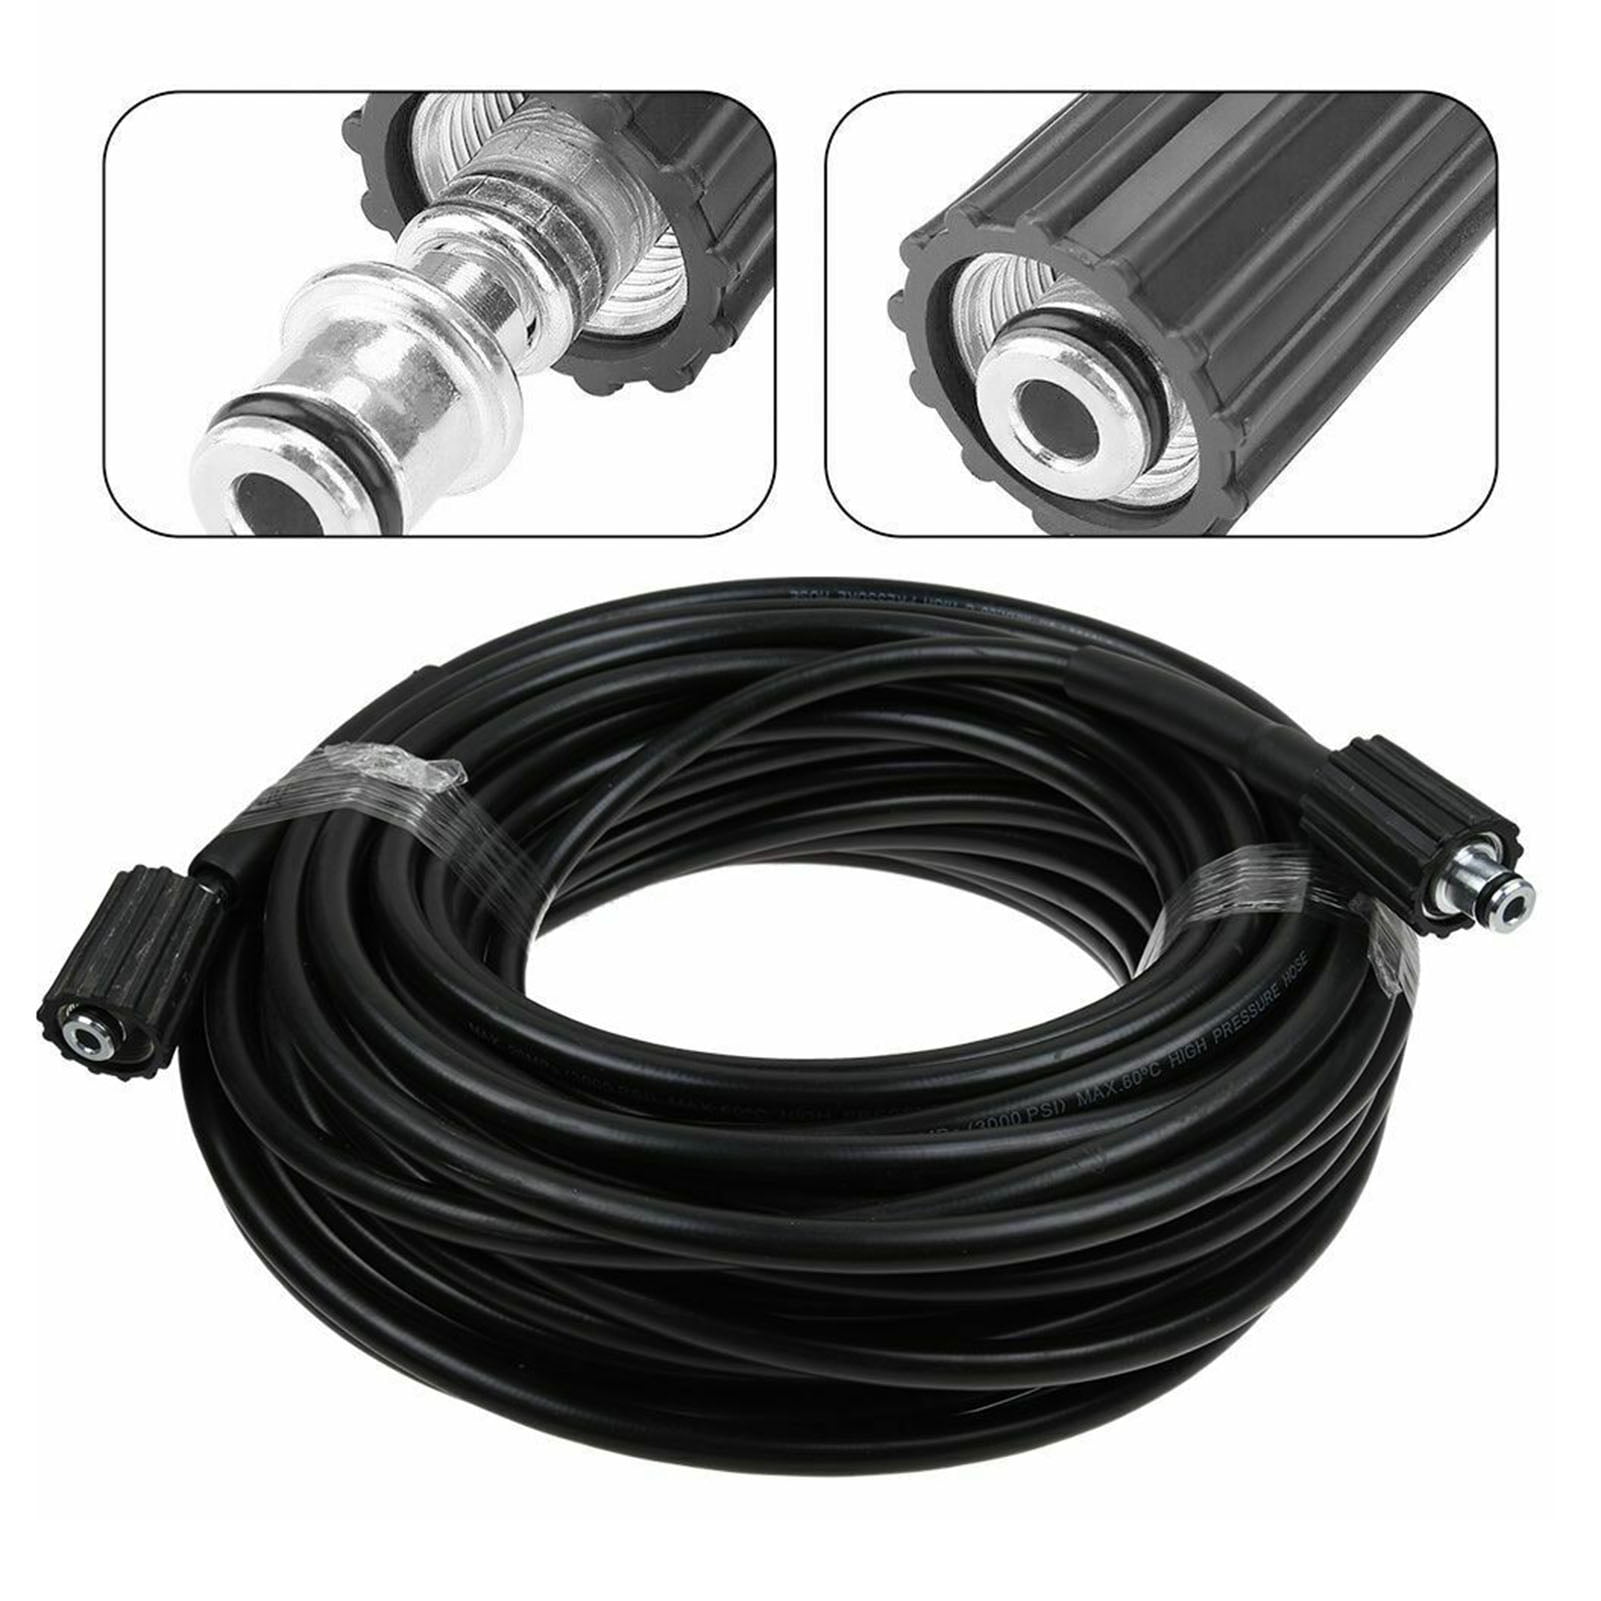 10m M22 Female to M22 male Extension Hose Jet Power Wash Pressure Washer 